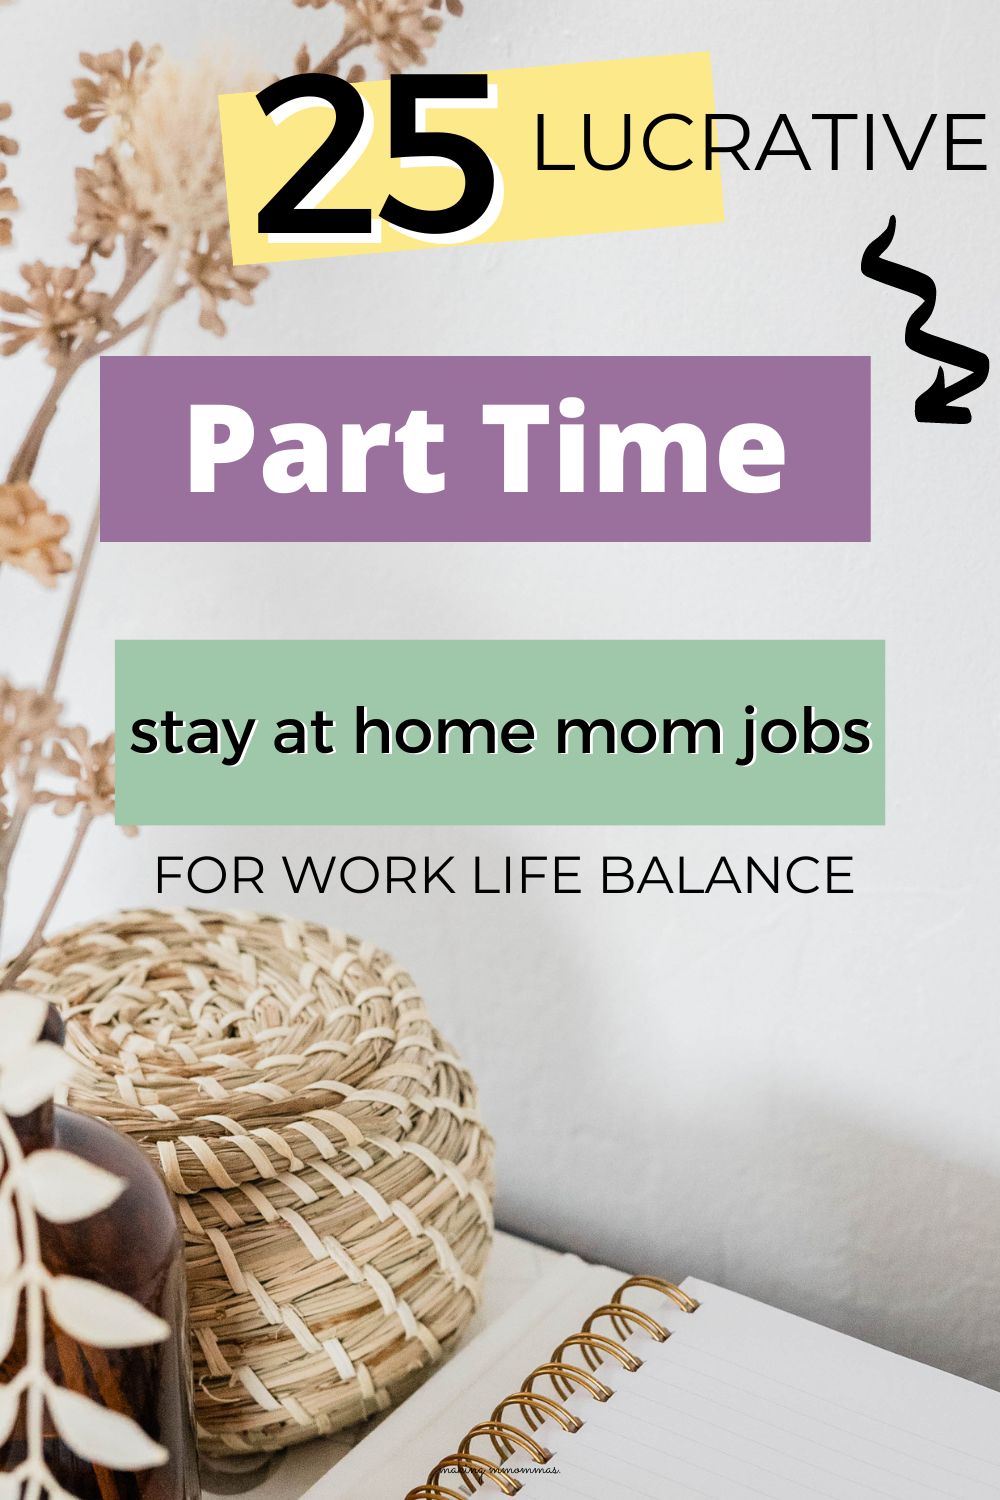 pin image of 25 lucrative part time stay at home mom jobs